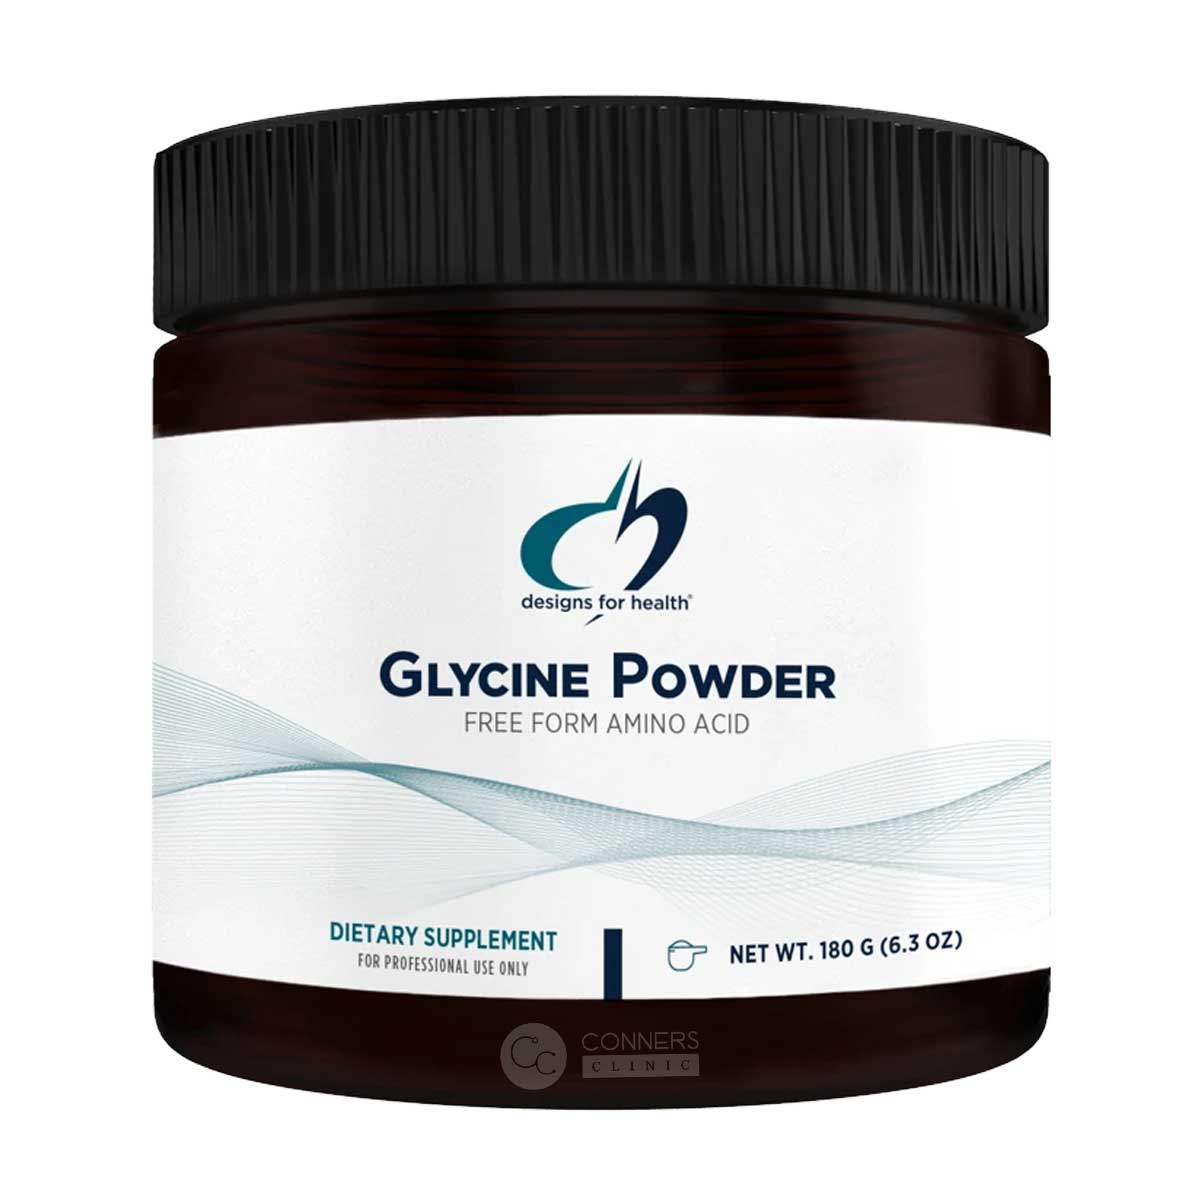 Glycine Powder Designs for Health Supplement - Conners Clinic